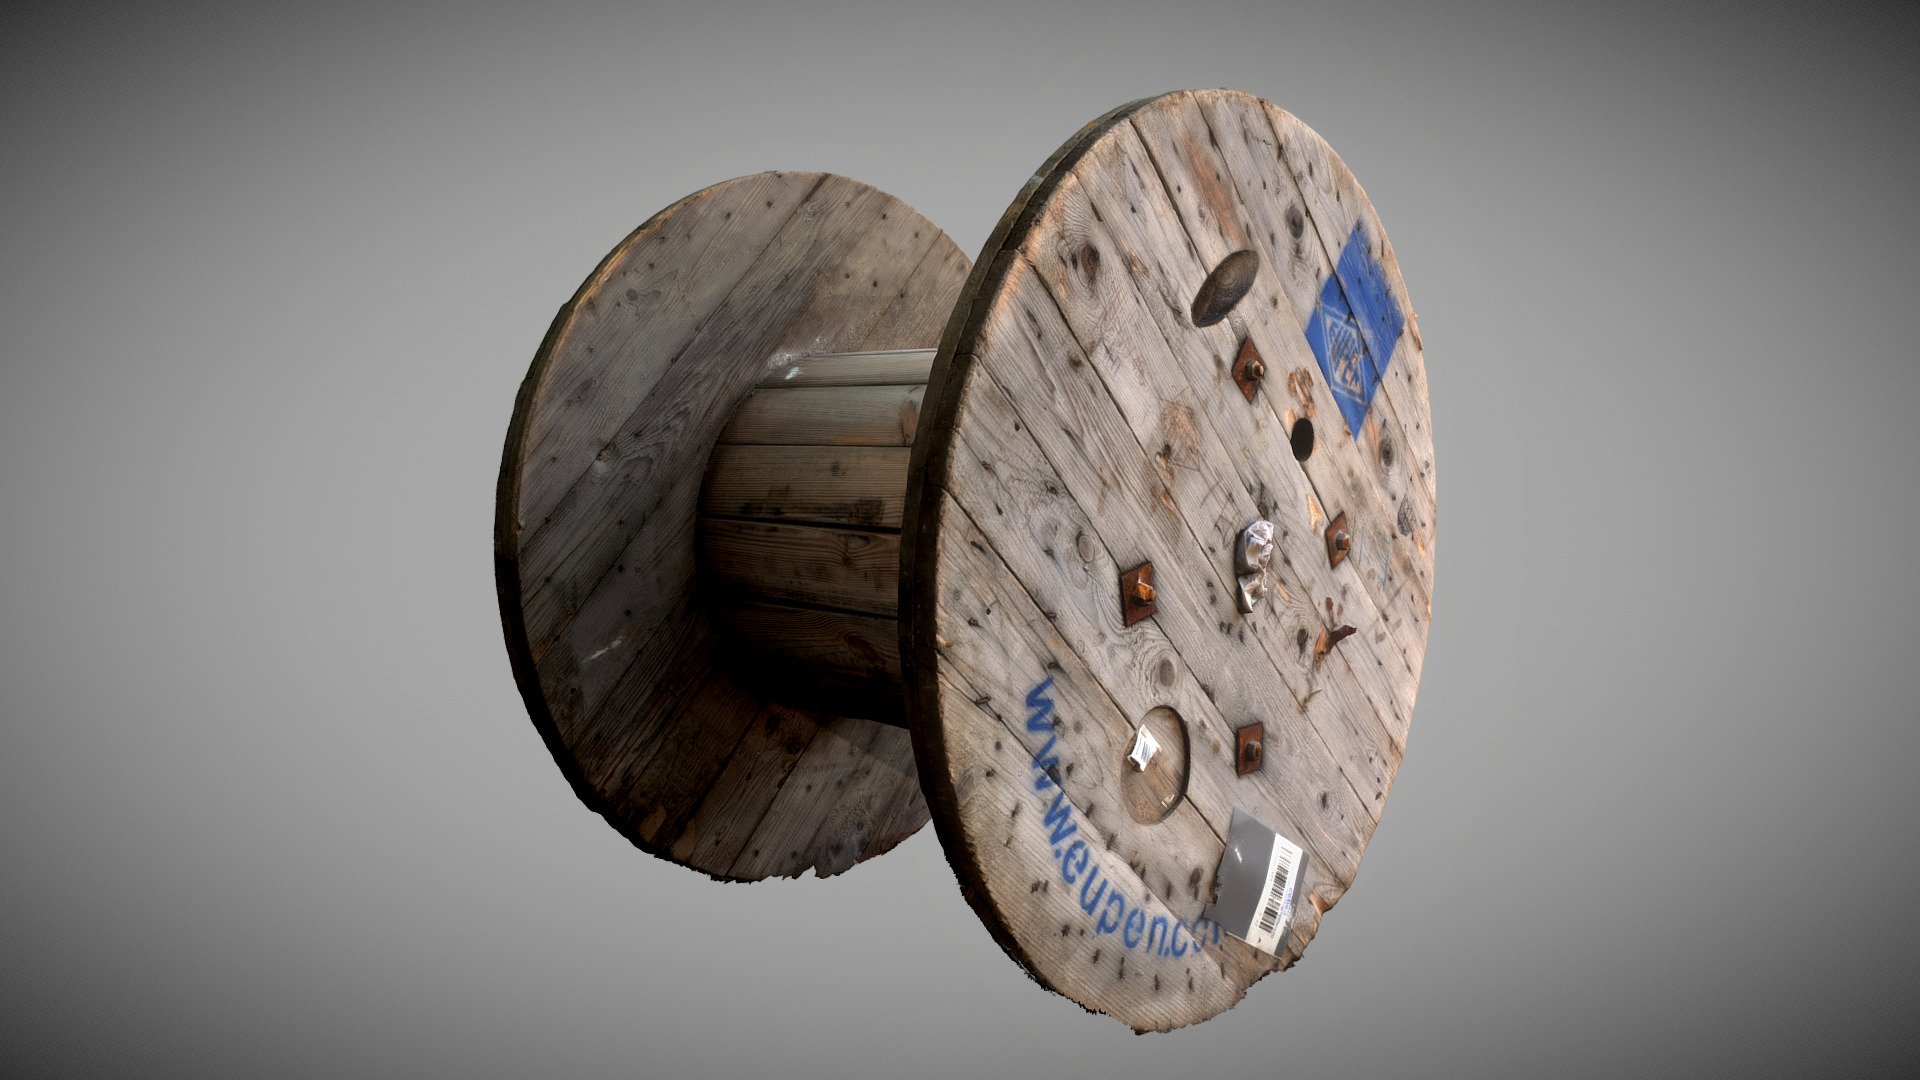 Wood Spool, Made of 430 pictures with MetaShape from Agisoft.

For more updates, please consider to follow me on Twitter at @GeoffreyMarchal (https://twitter.com/GeoffreyMarchal) - Wood Spool - Buy Royalty Free 3D model by GM3Dscan 3d model